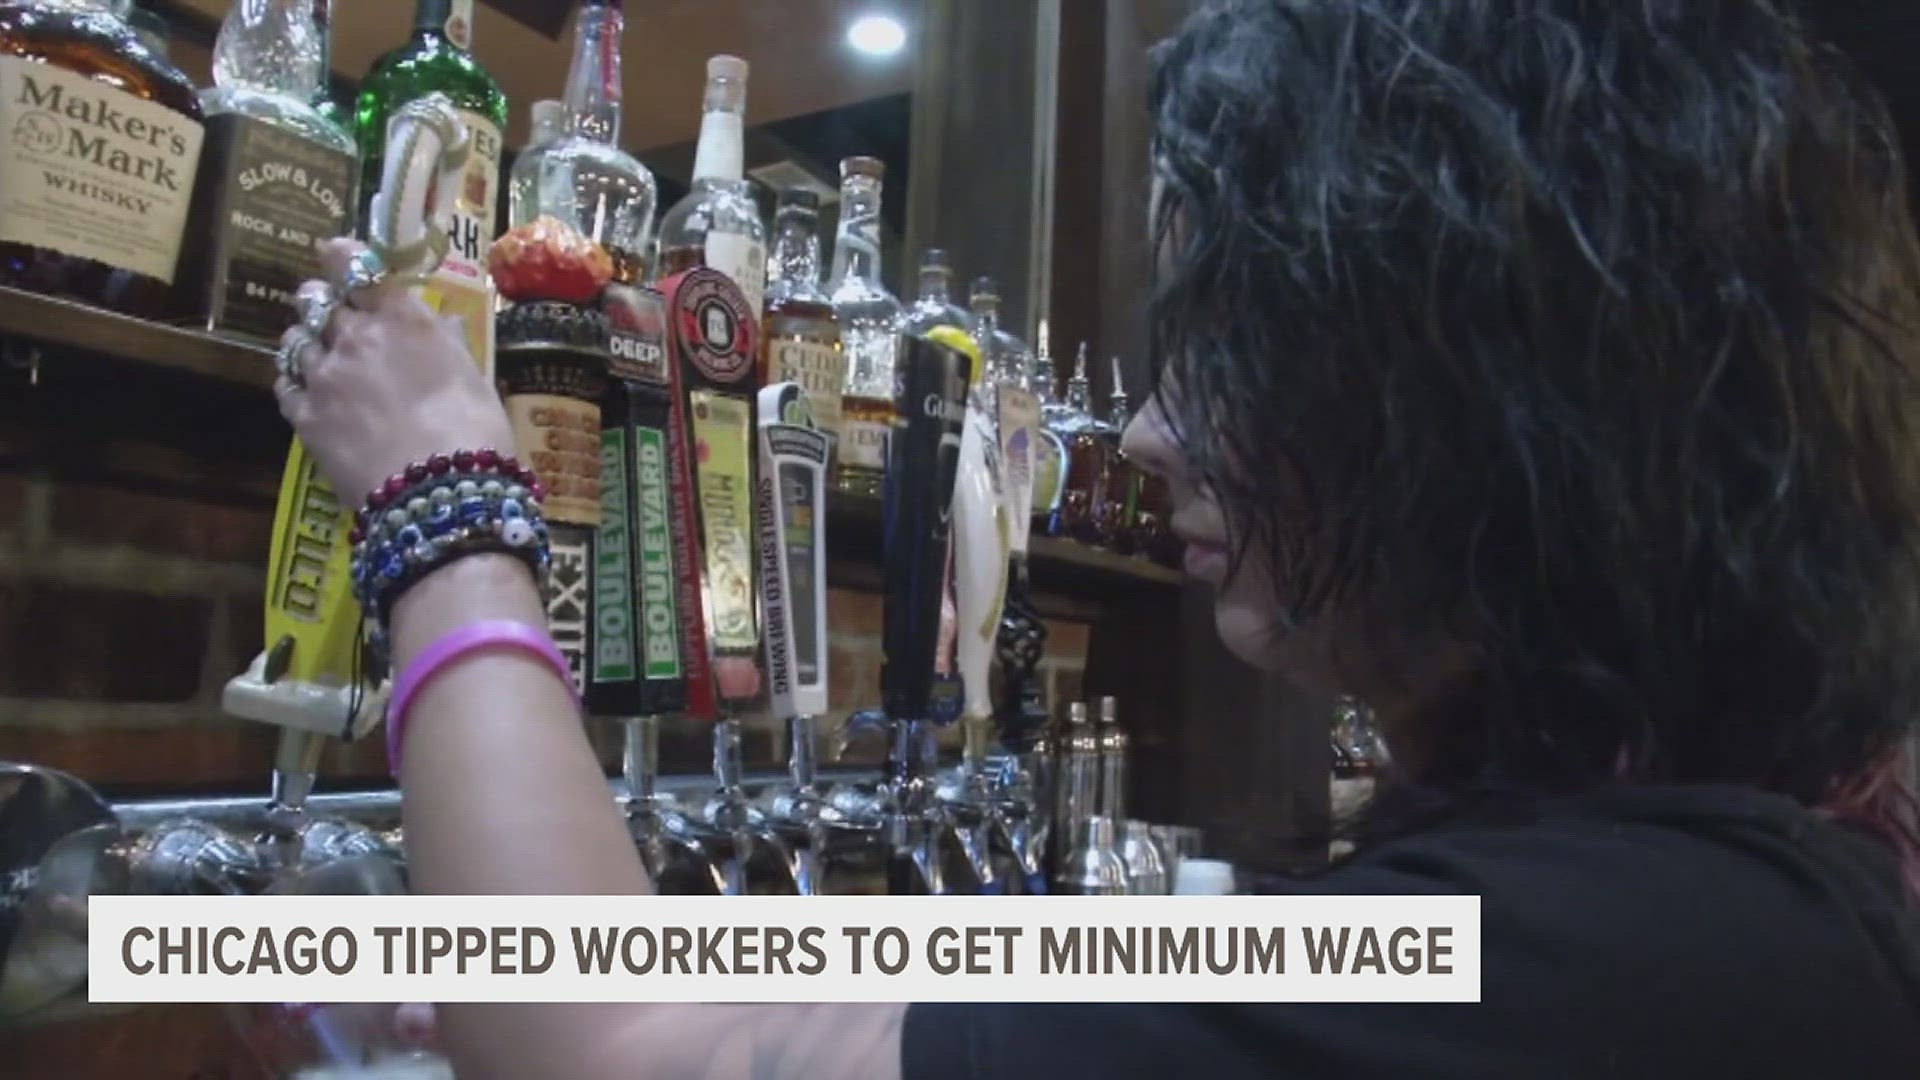 The Illinois Restaurant Association has reached an agreement with the city of Chicago to increase the minimum wages of workers by 2028.